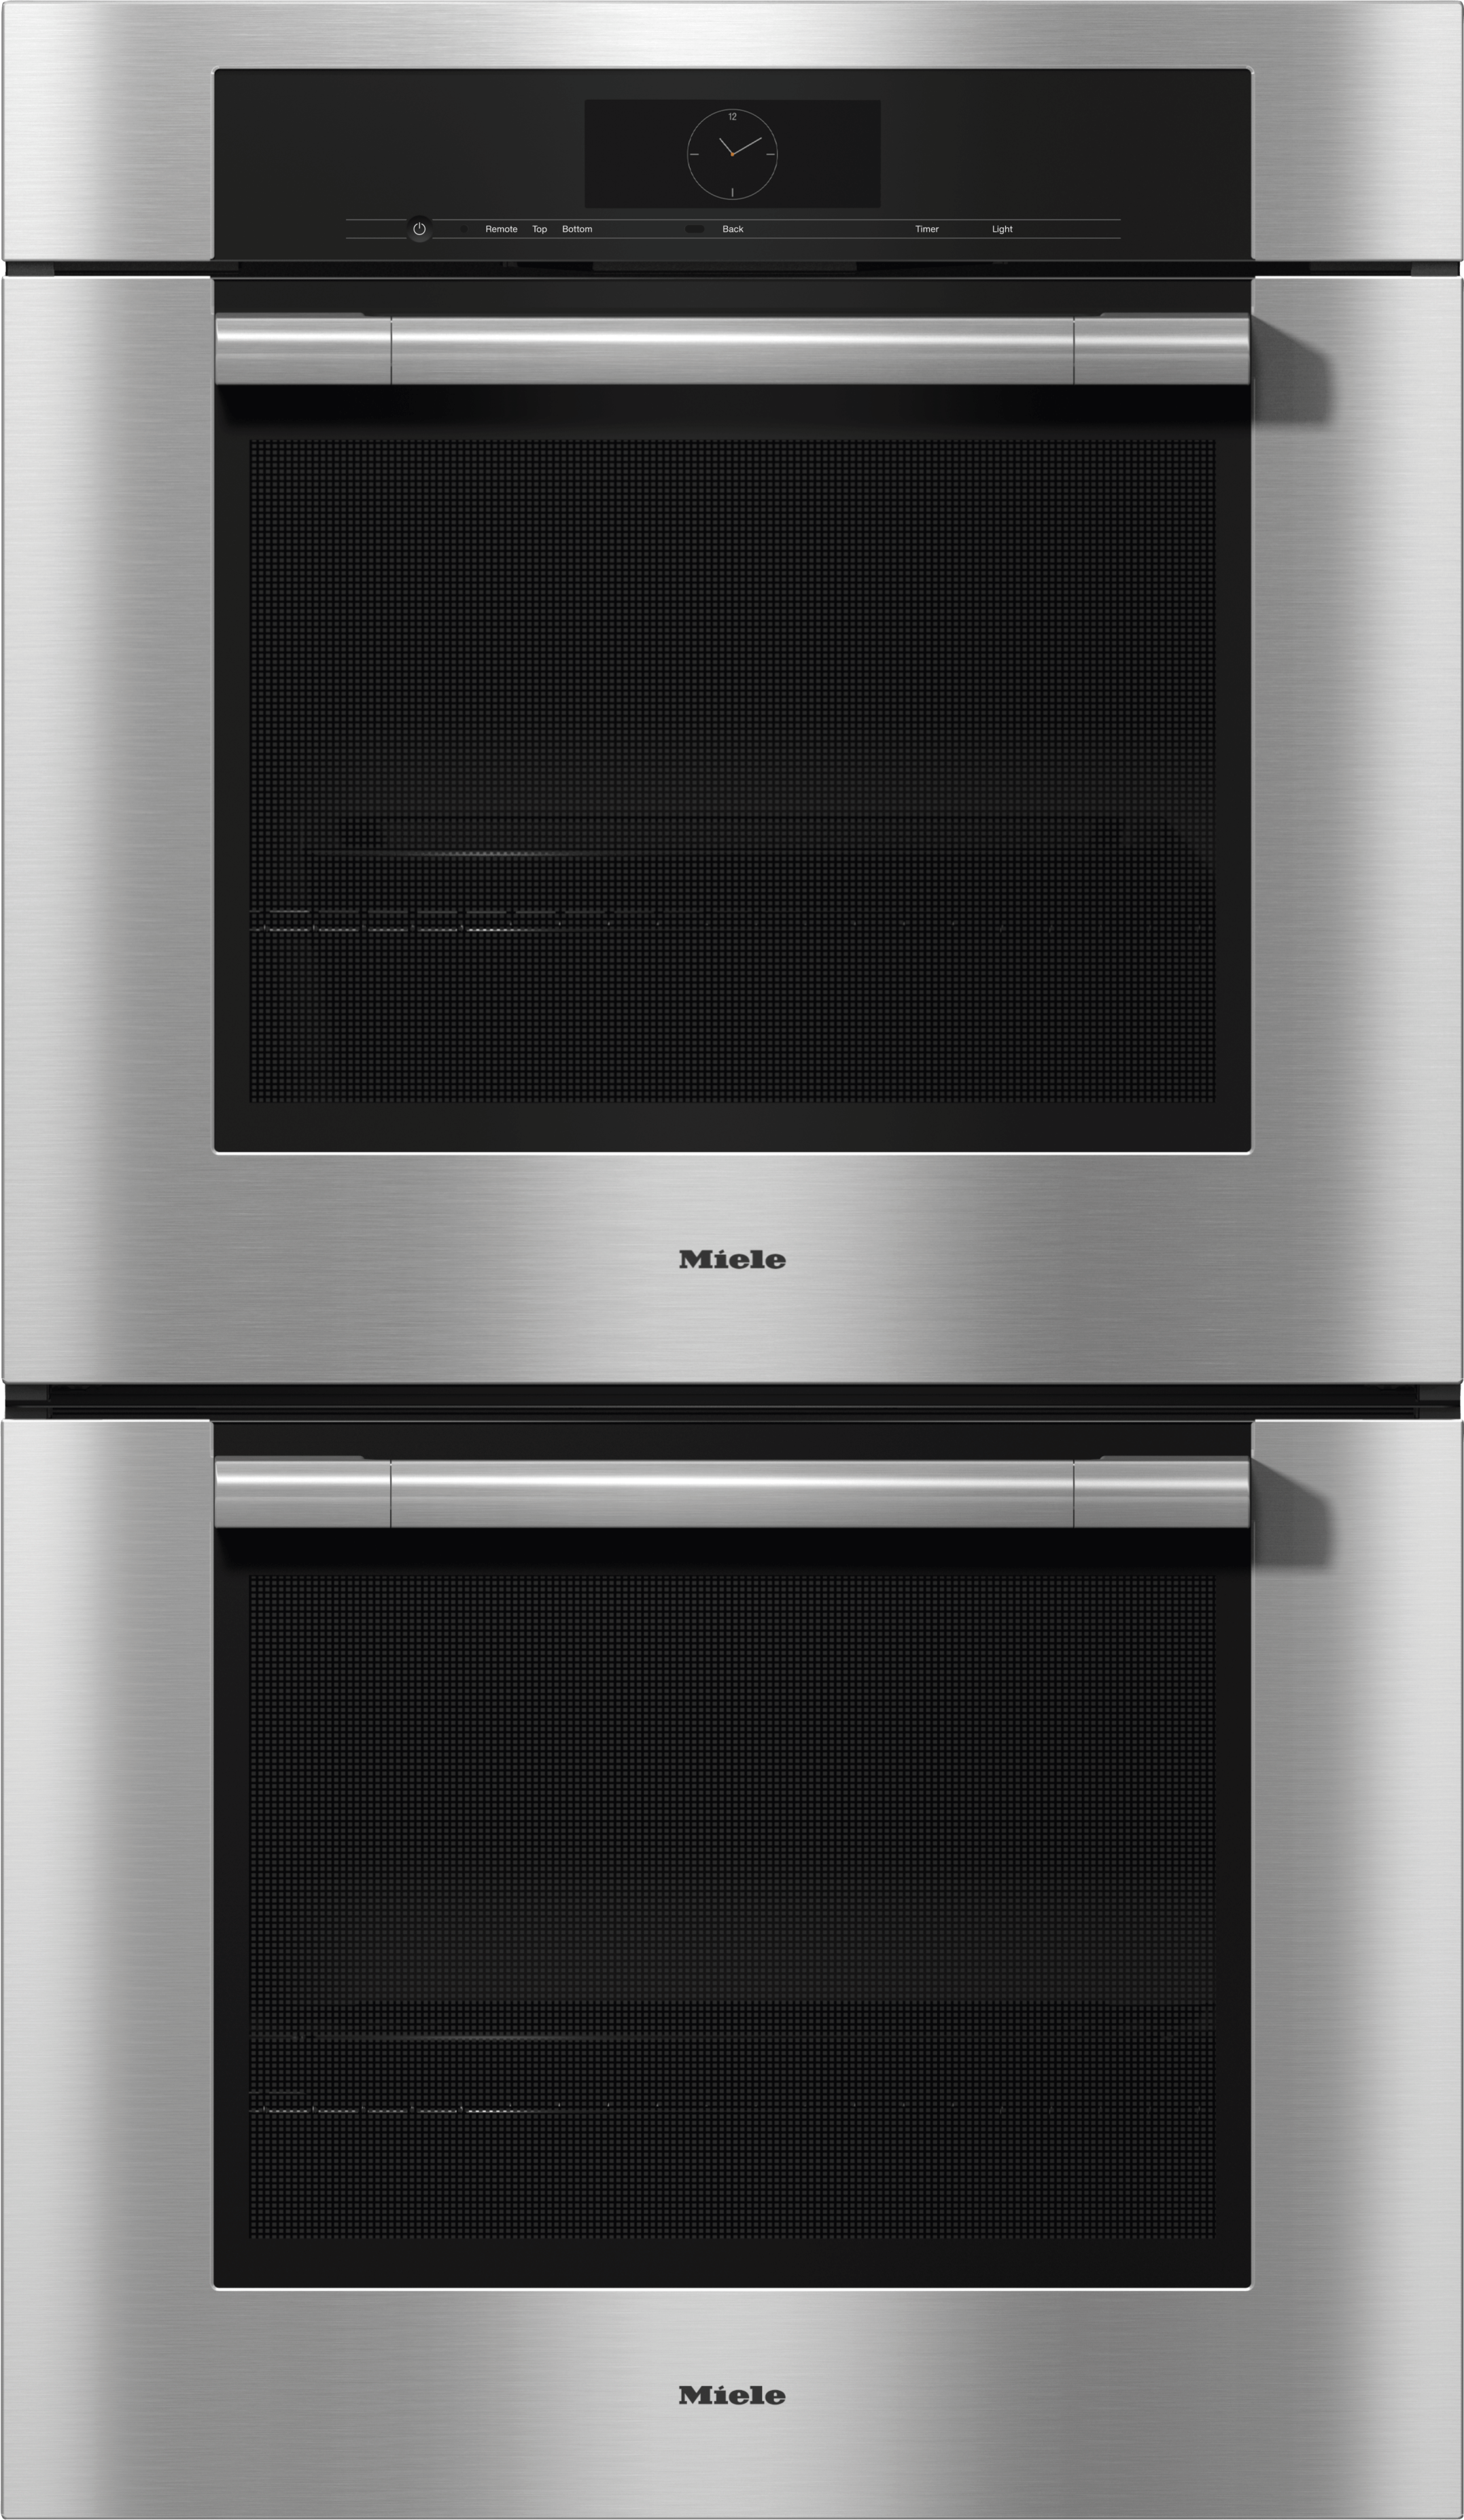 H 7780 BP2 - 30" double oven in a combinable design with wireless precision probe.